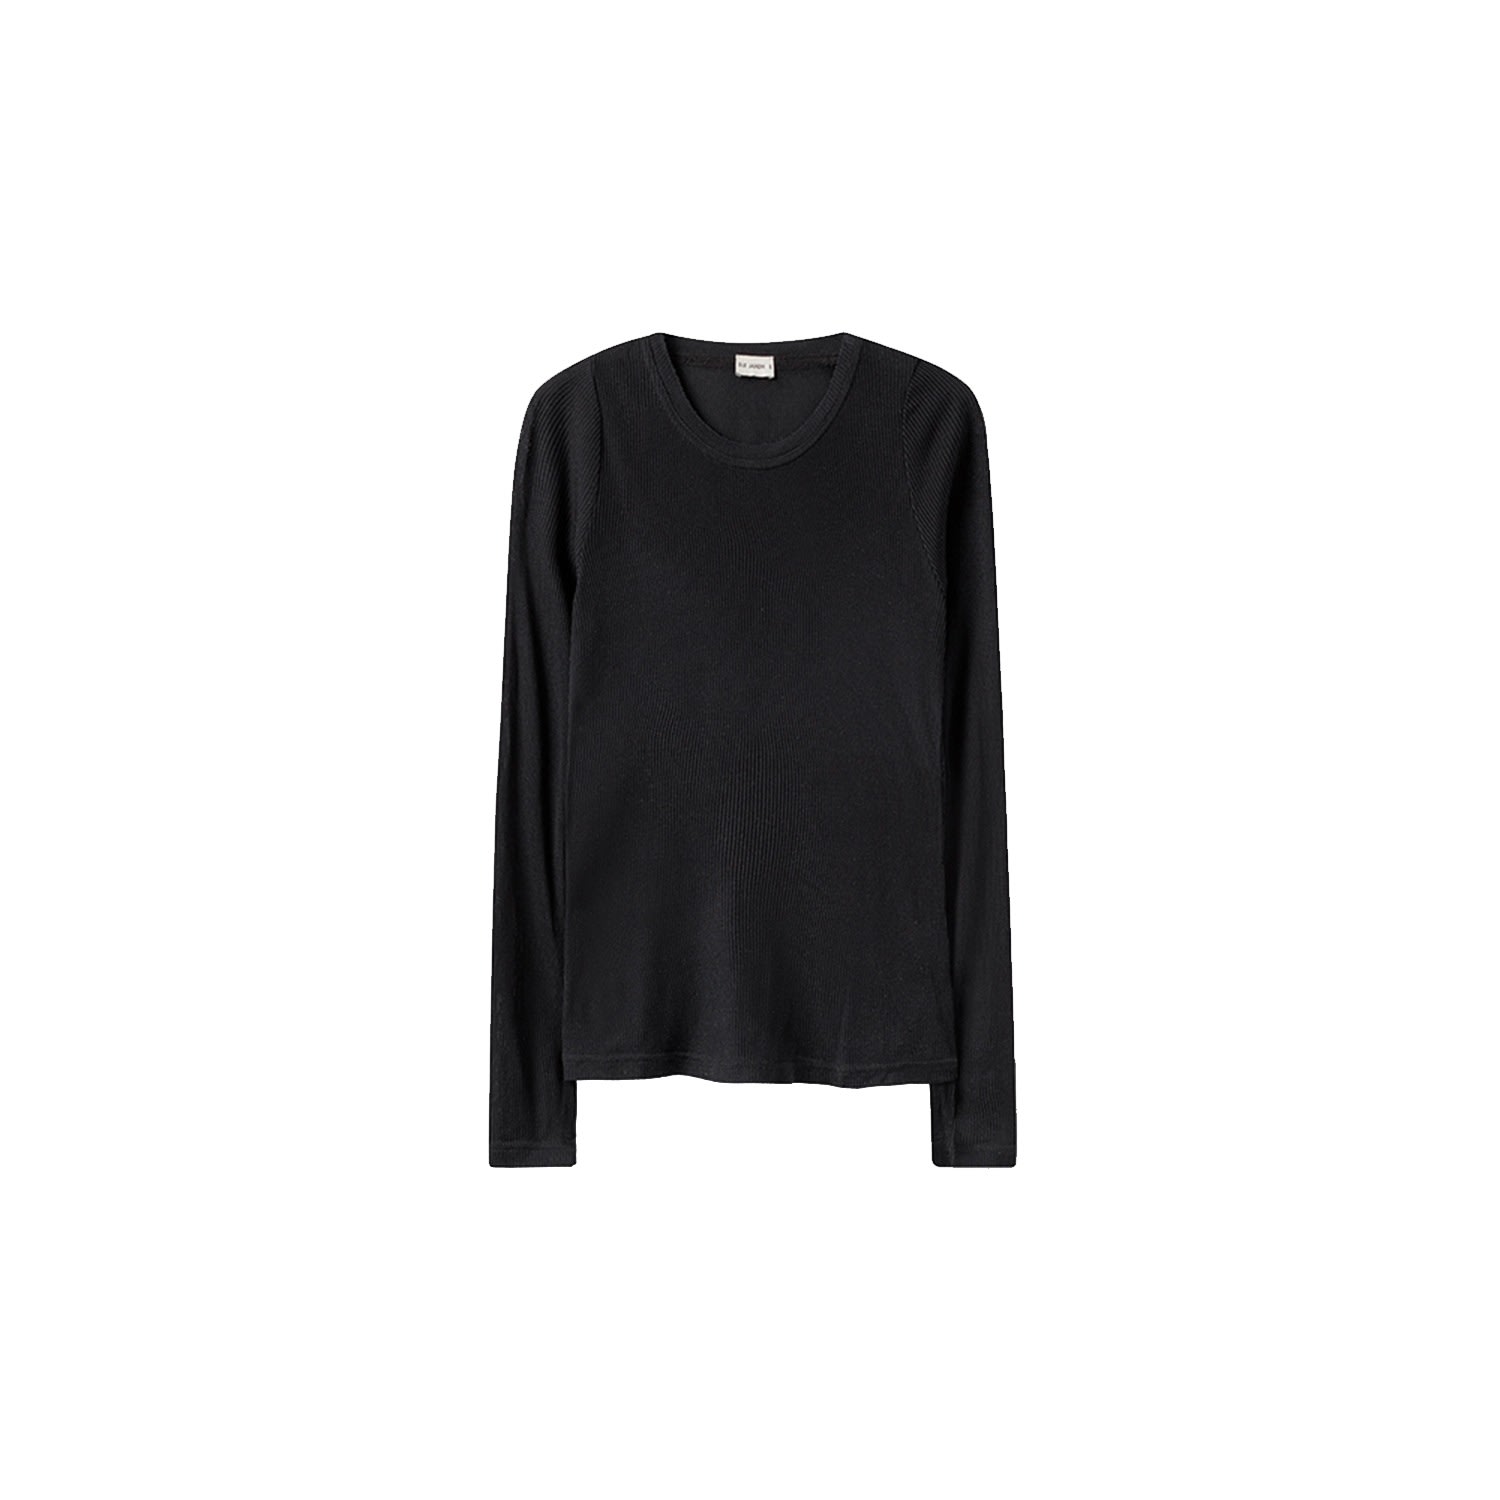 Women’s Ribbed Long Sleeve Top Black Extra Large Silk Laundry